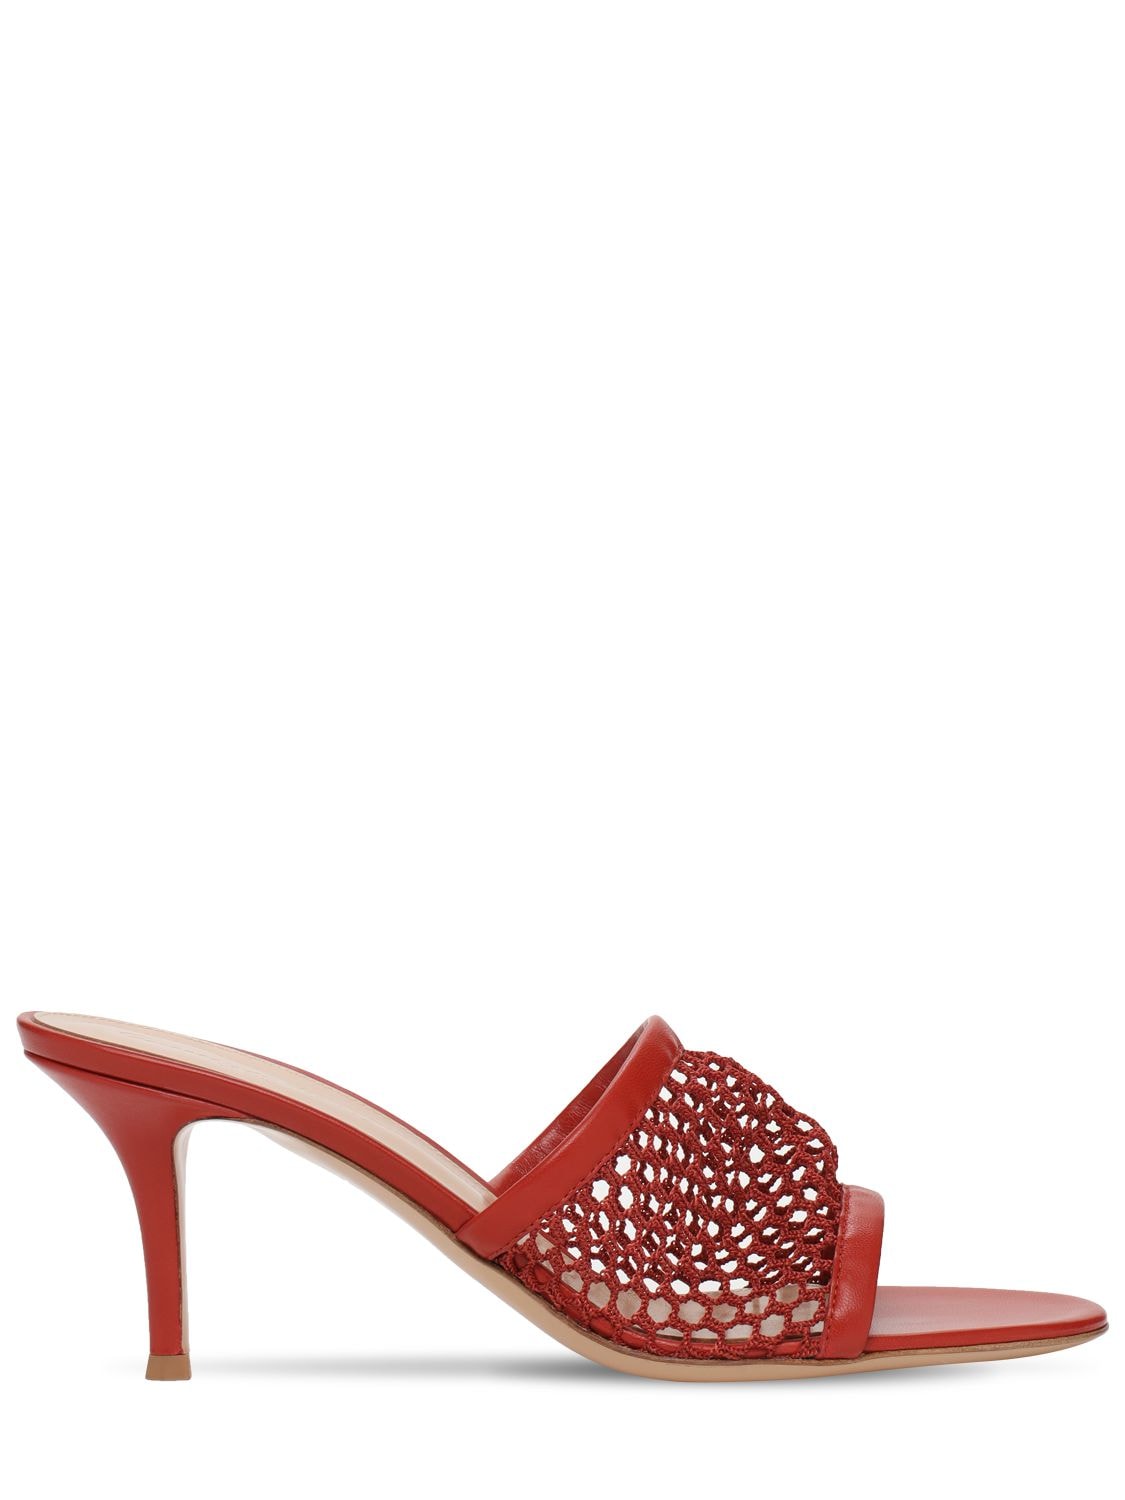 Gianvito Rossi 70mm Fishnet Mesh & Leather Mules In Red